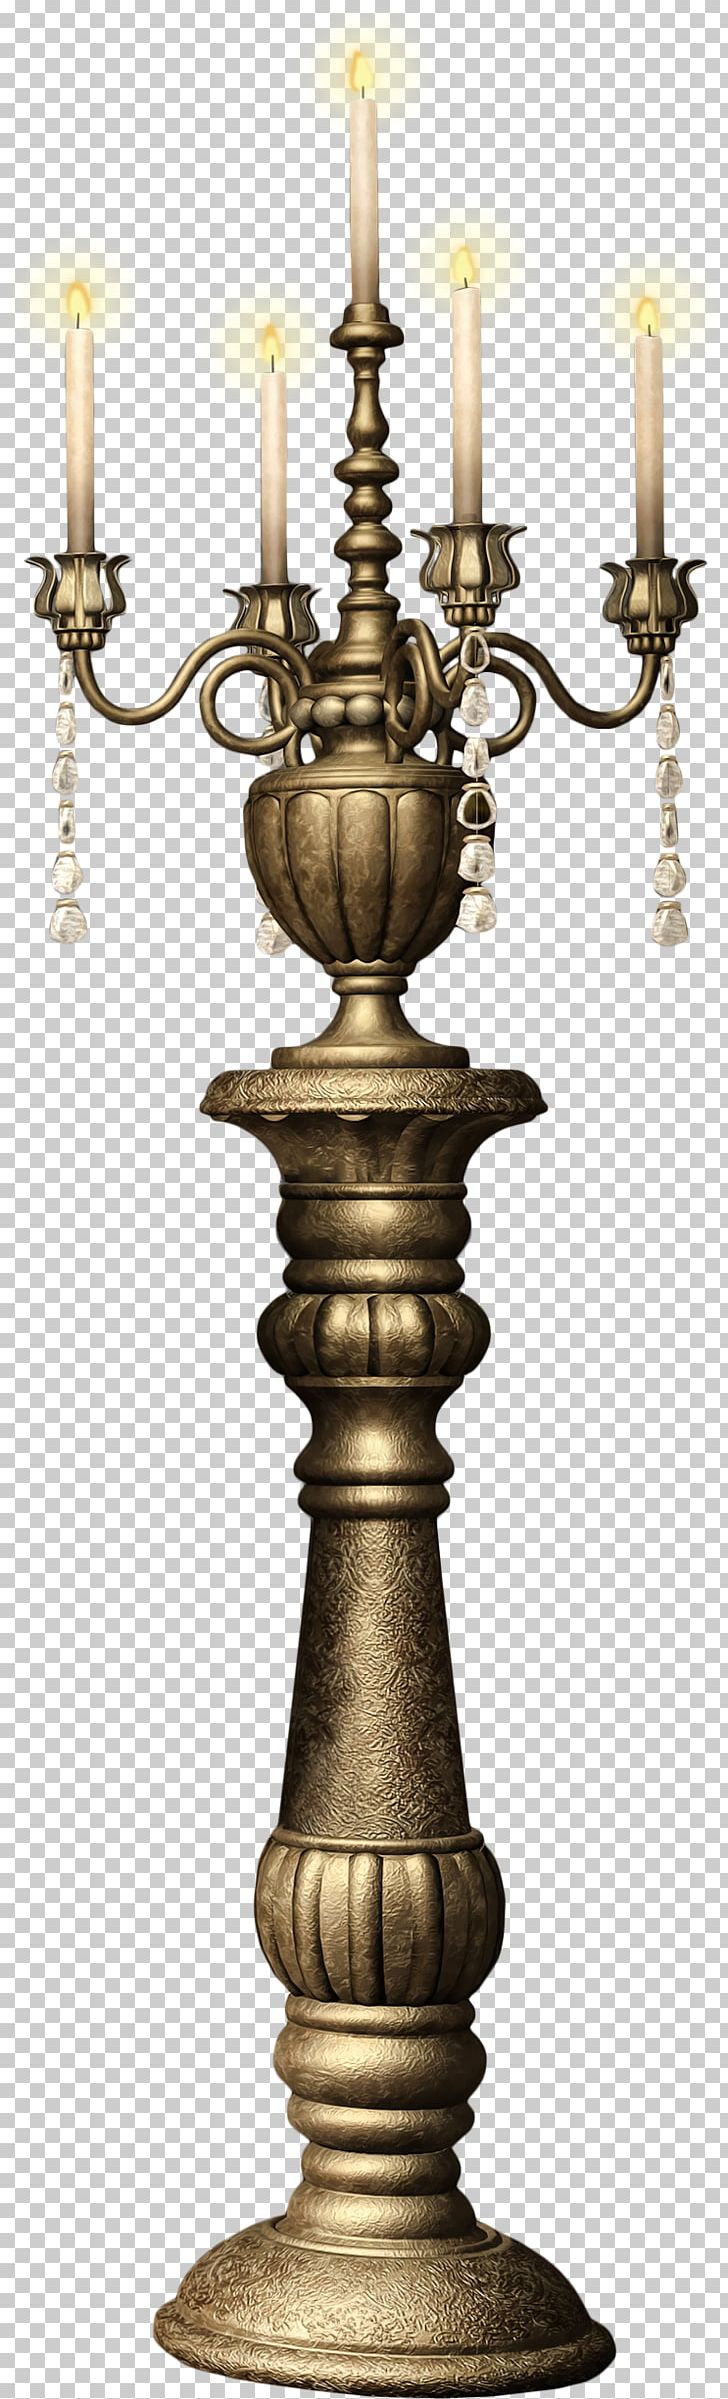 Candlestick Light Fixture Birthday Lighting PNG, Clipart, Birthday, Blog, Brass, Bronze, Candle Free PNG Download